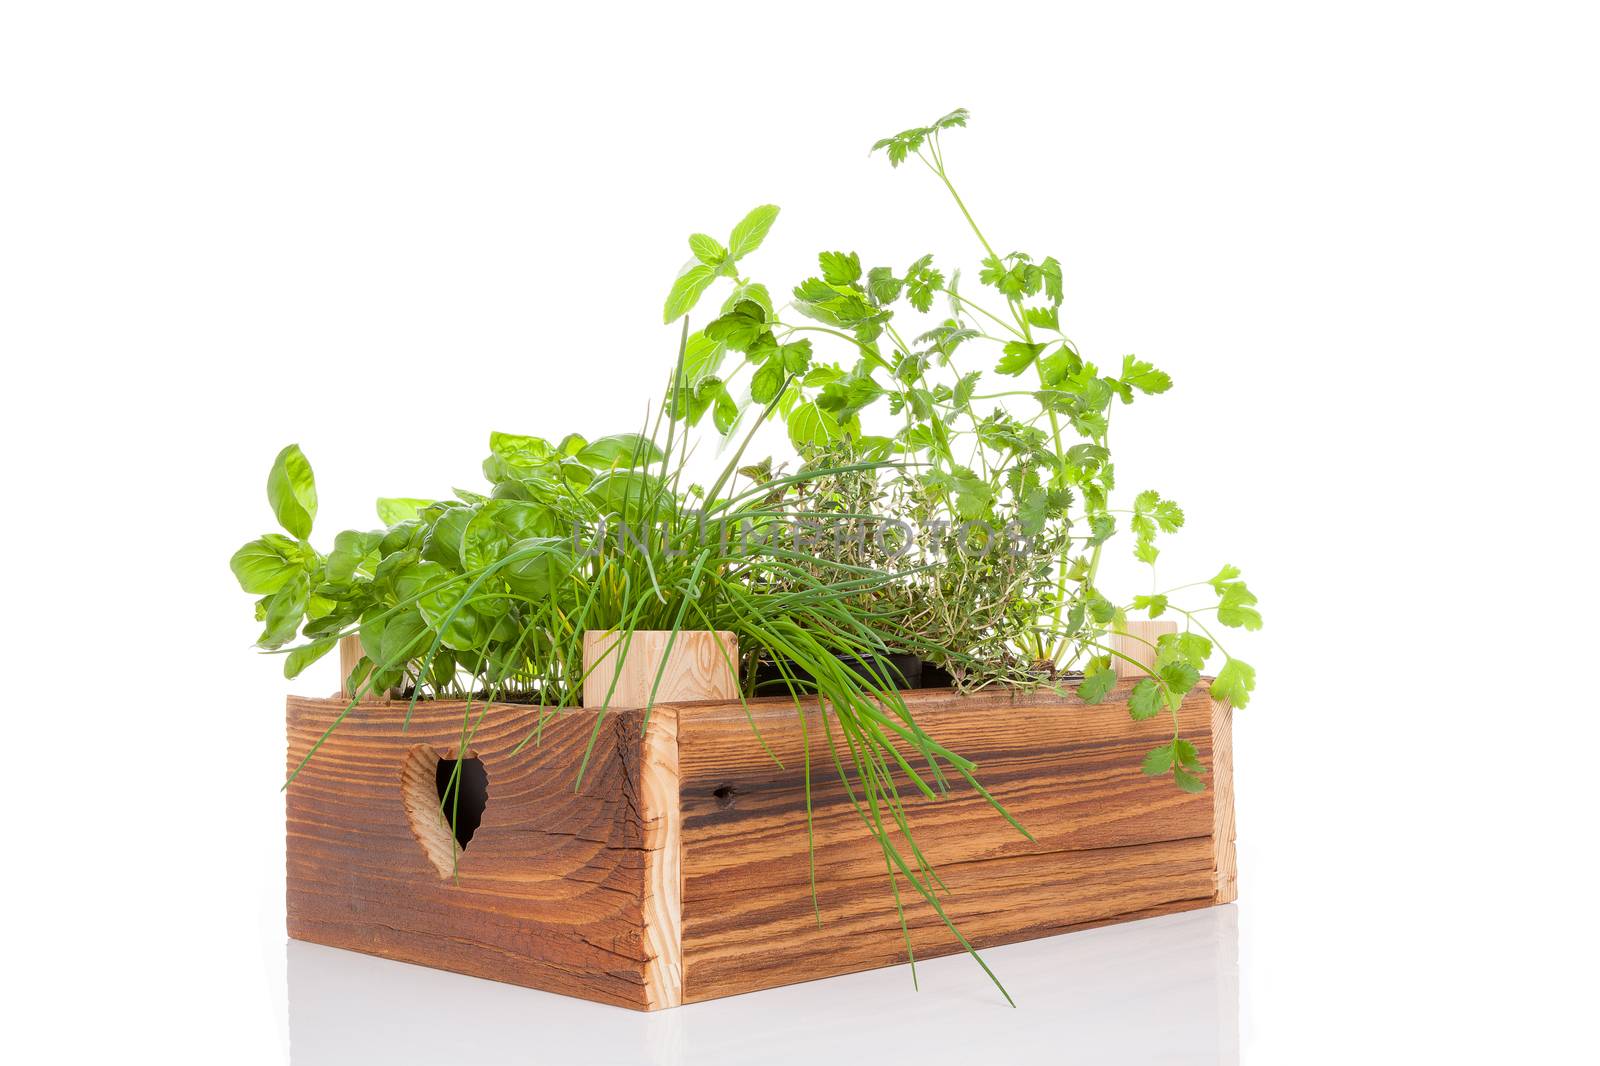 Herbs in wooden crate. by eskymaks